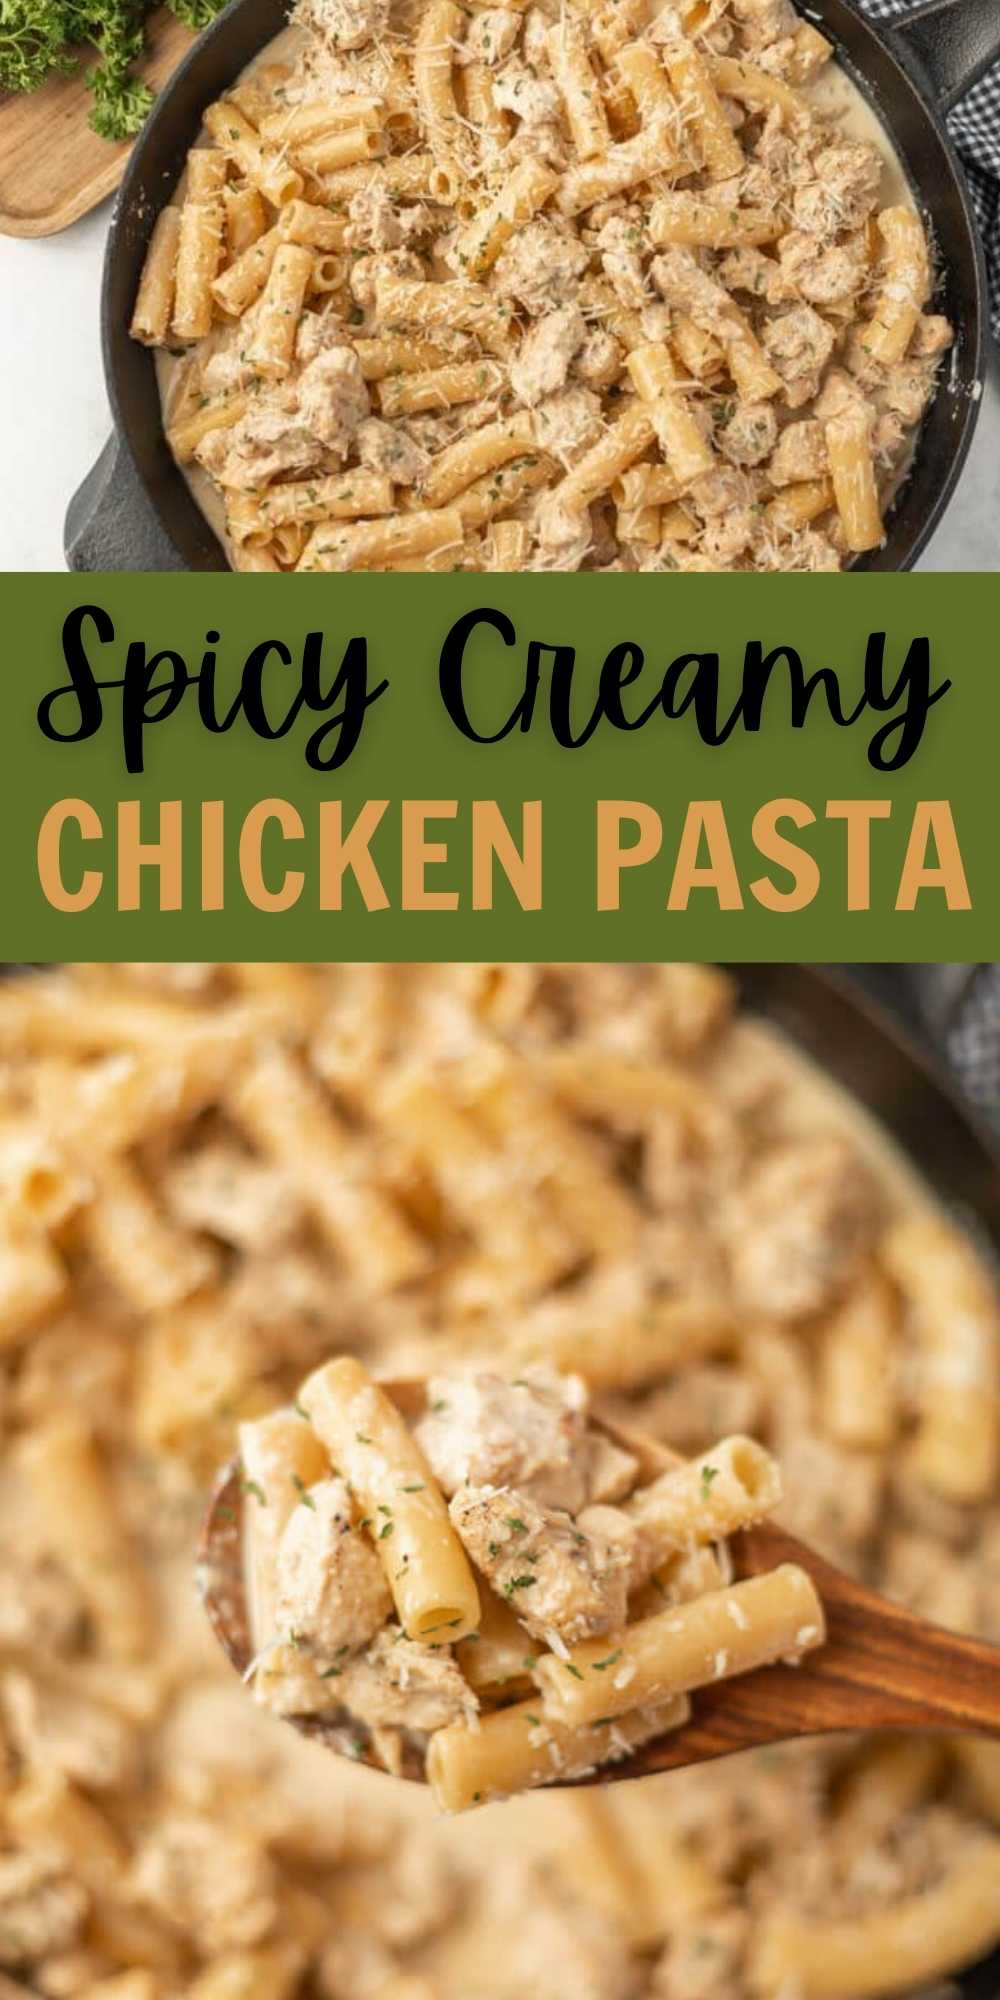 If you are looking for an easy meal that your entire family will enjoy, try Spicy Creamy Chicken Pasta Recipe. It is loaded with tender chicken, tomatoes, cream cheese and more. It is creamy and delicious! This one pot meal is packed with flavor. #eatingonadime #spicycreamy #chickenpasta #pastarecipes